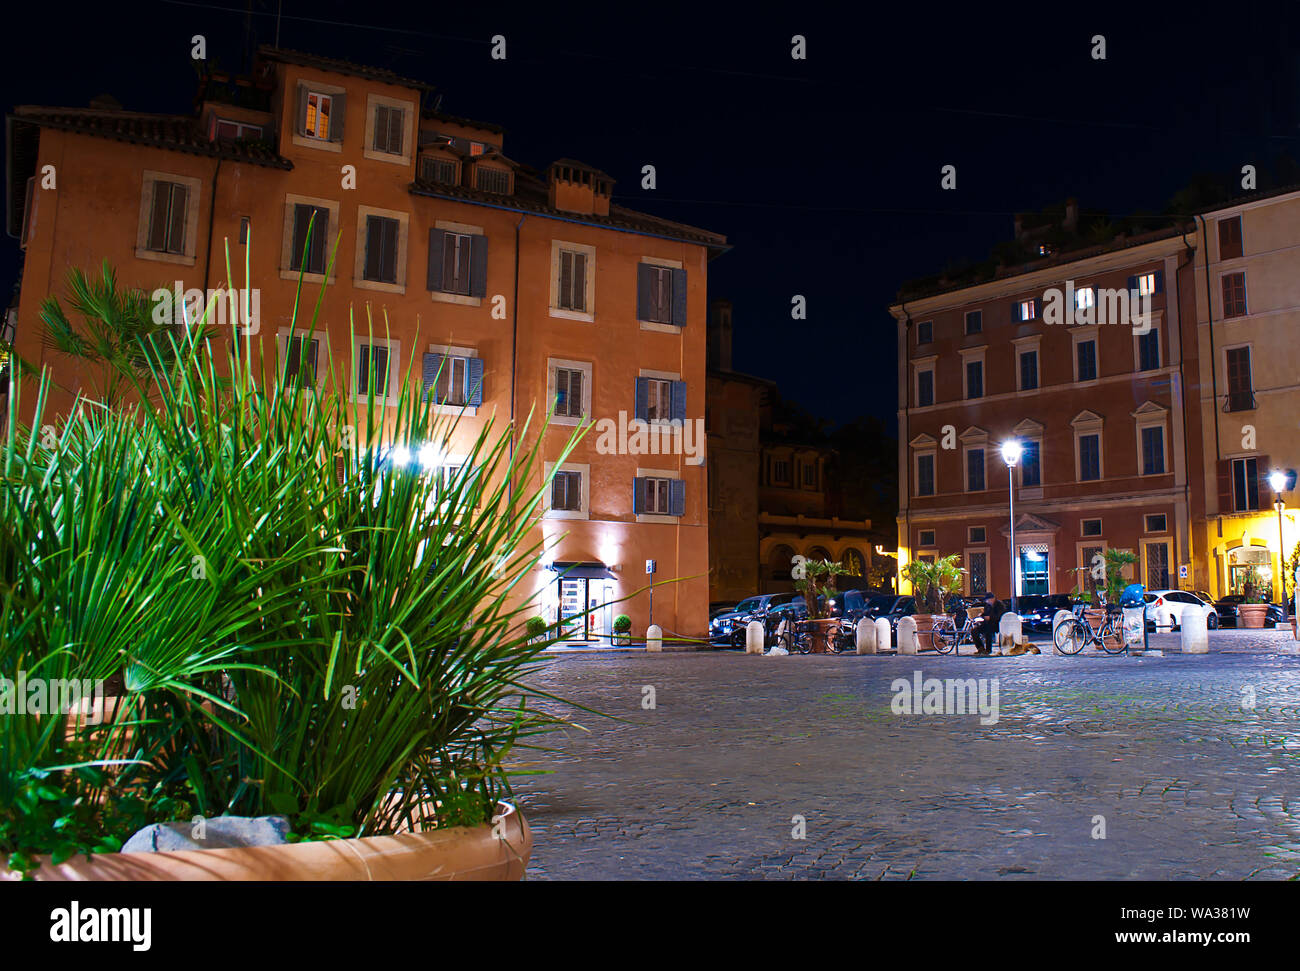 Solitary square in the city center of the capital of Italy, Rome. Warm fall night, pitch-black sky, calm atmosphere Stock Photo